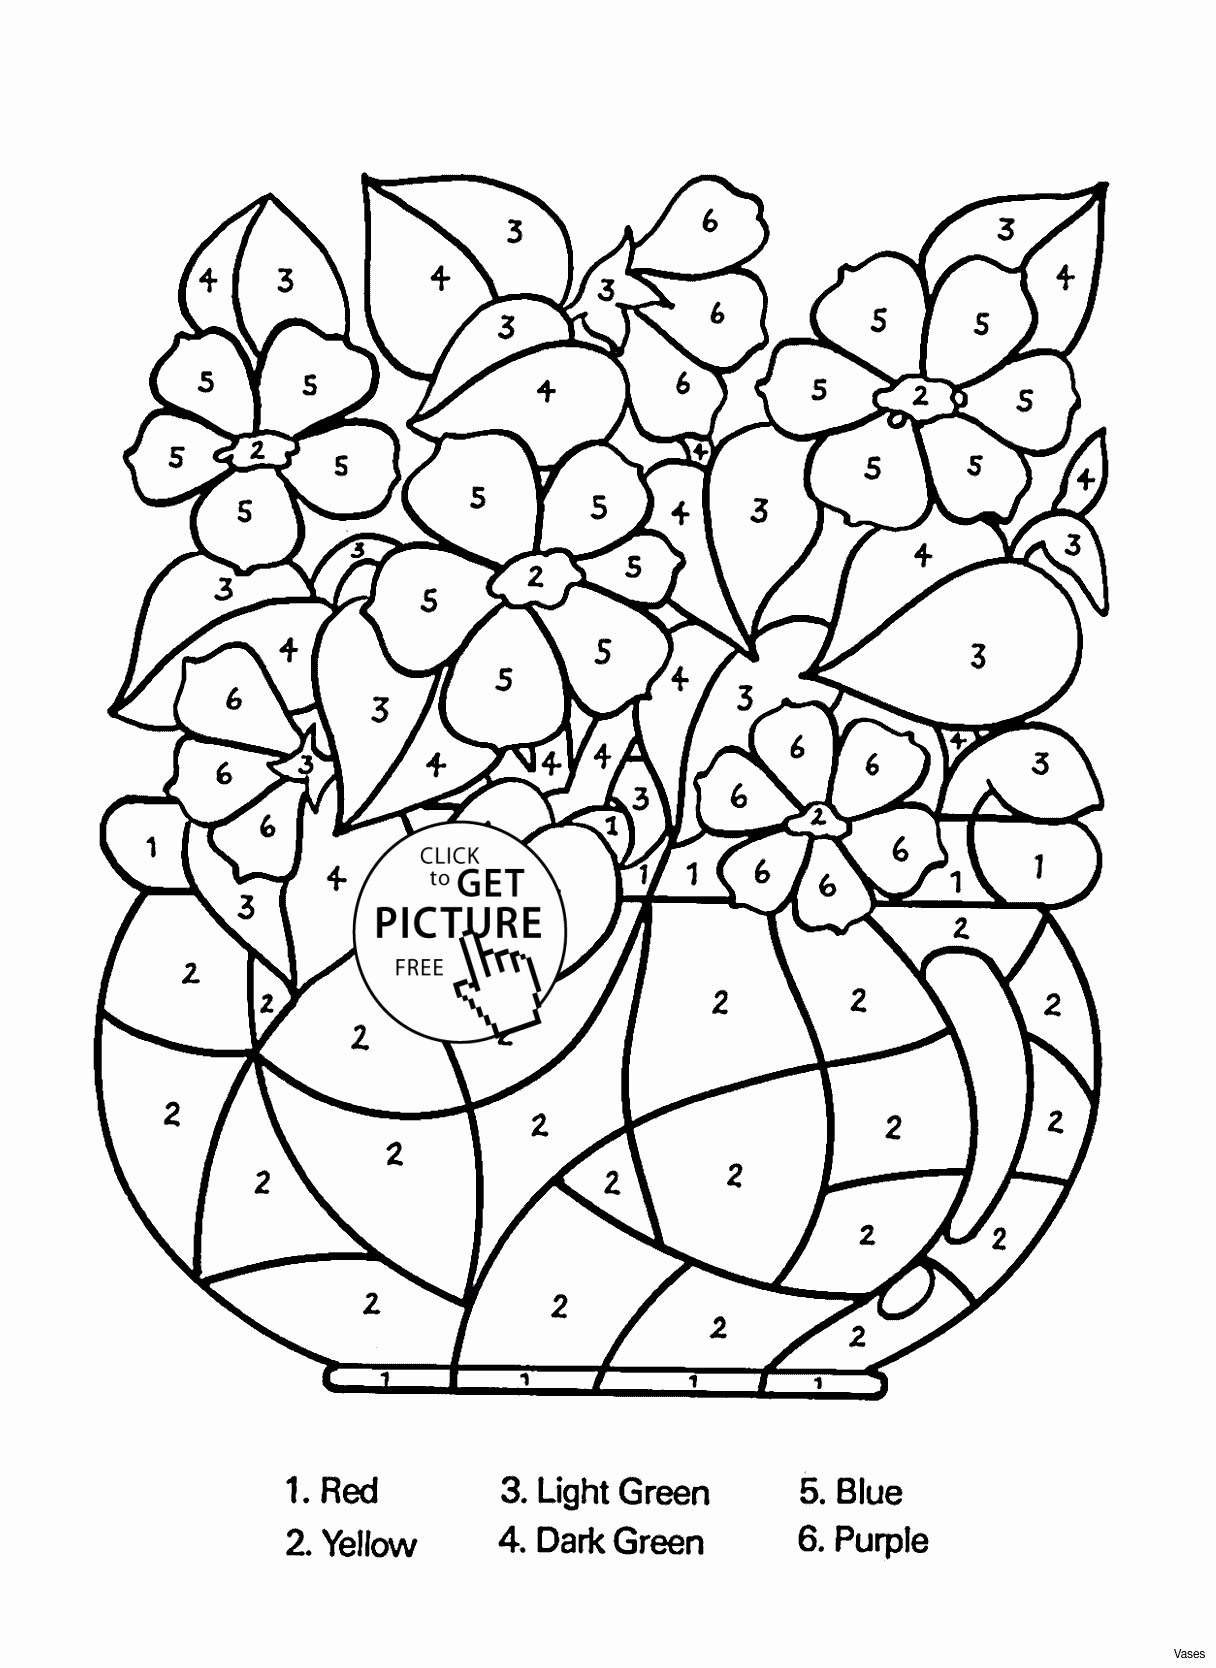 28 Awesome Short Glass Cylinder Vases 2024 free download short glass cylinder vases of 5 cylinder vase photograph small glass shower awesome glass bottle for 5 cylinder vase photograph vases flower vase coloring page pages flowers in a top i 0d